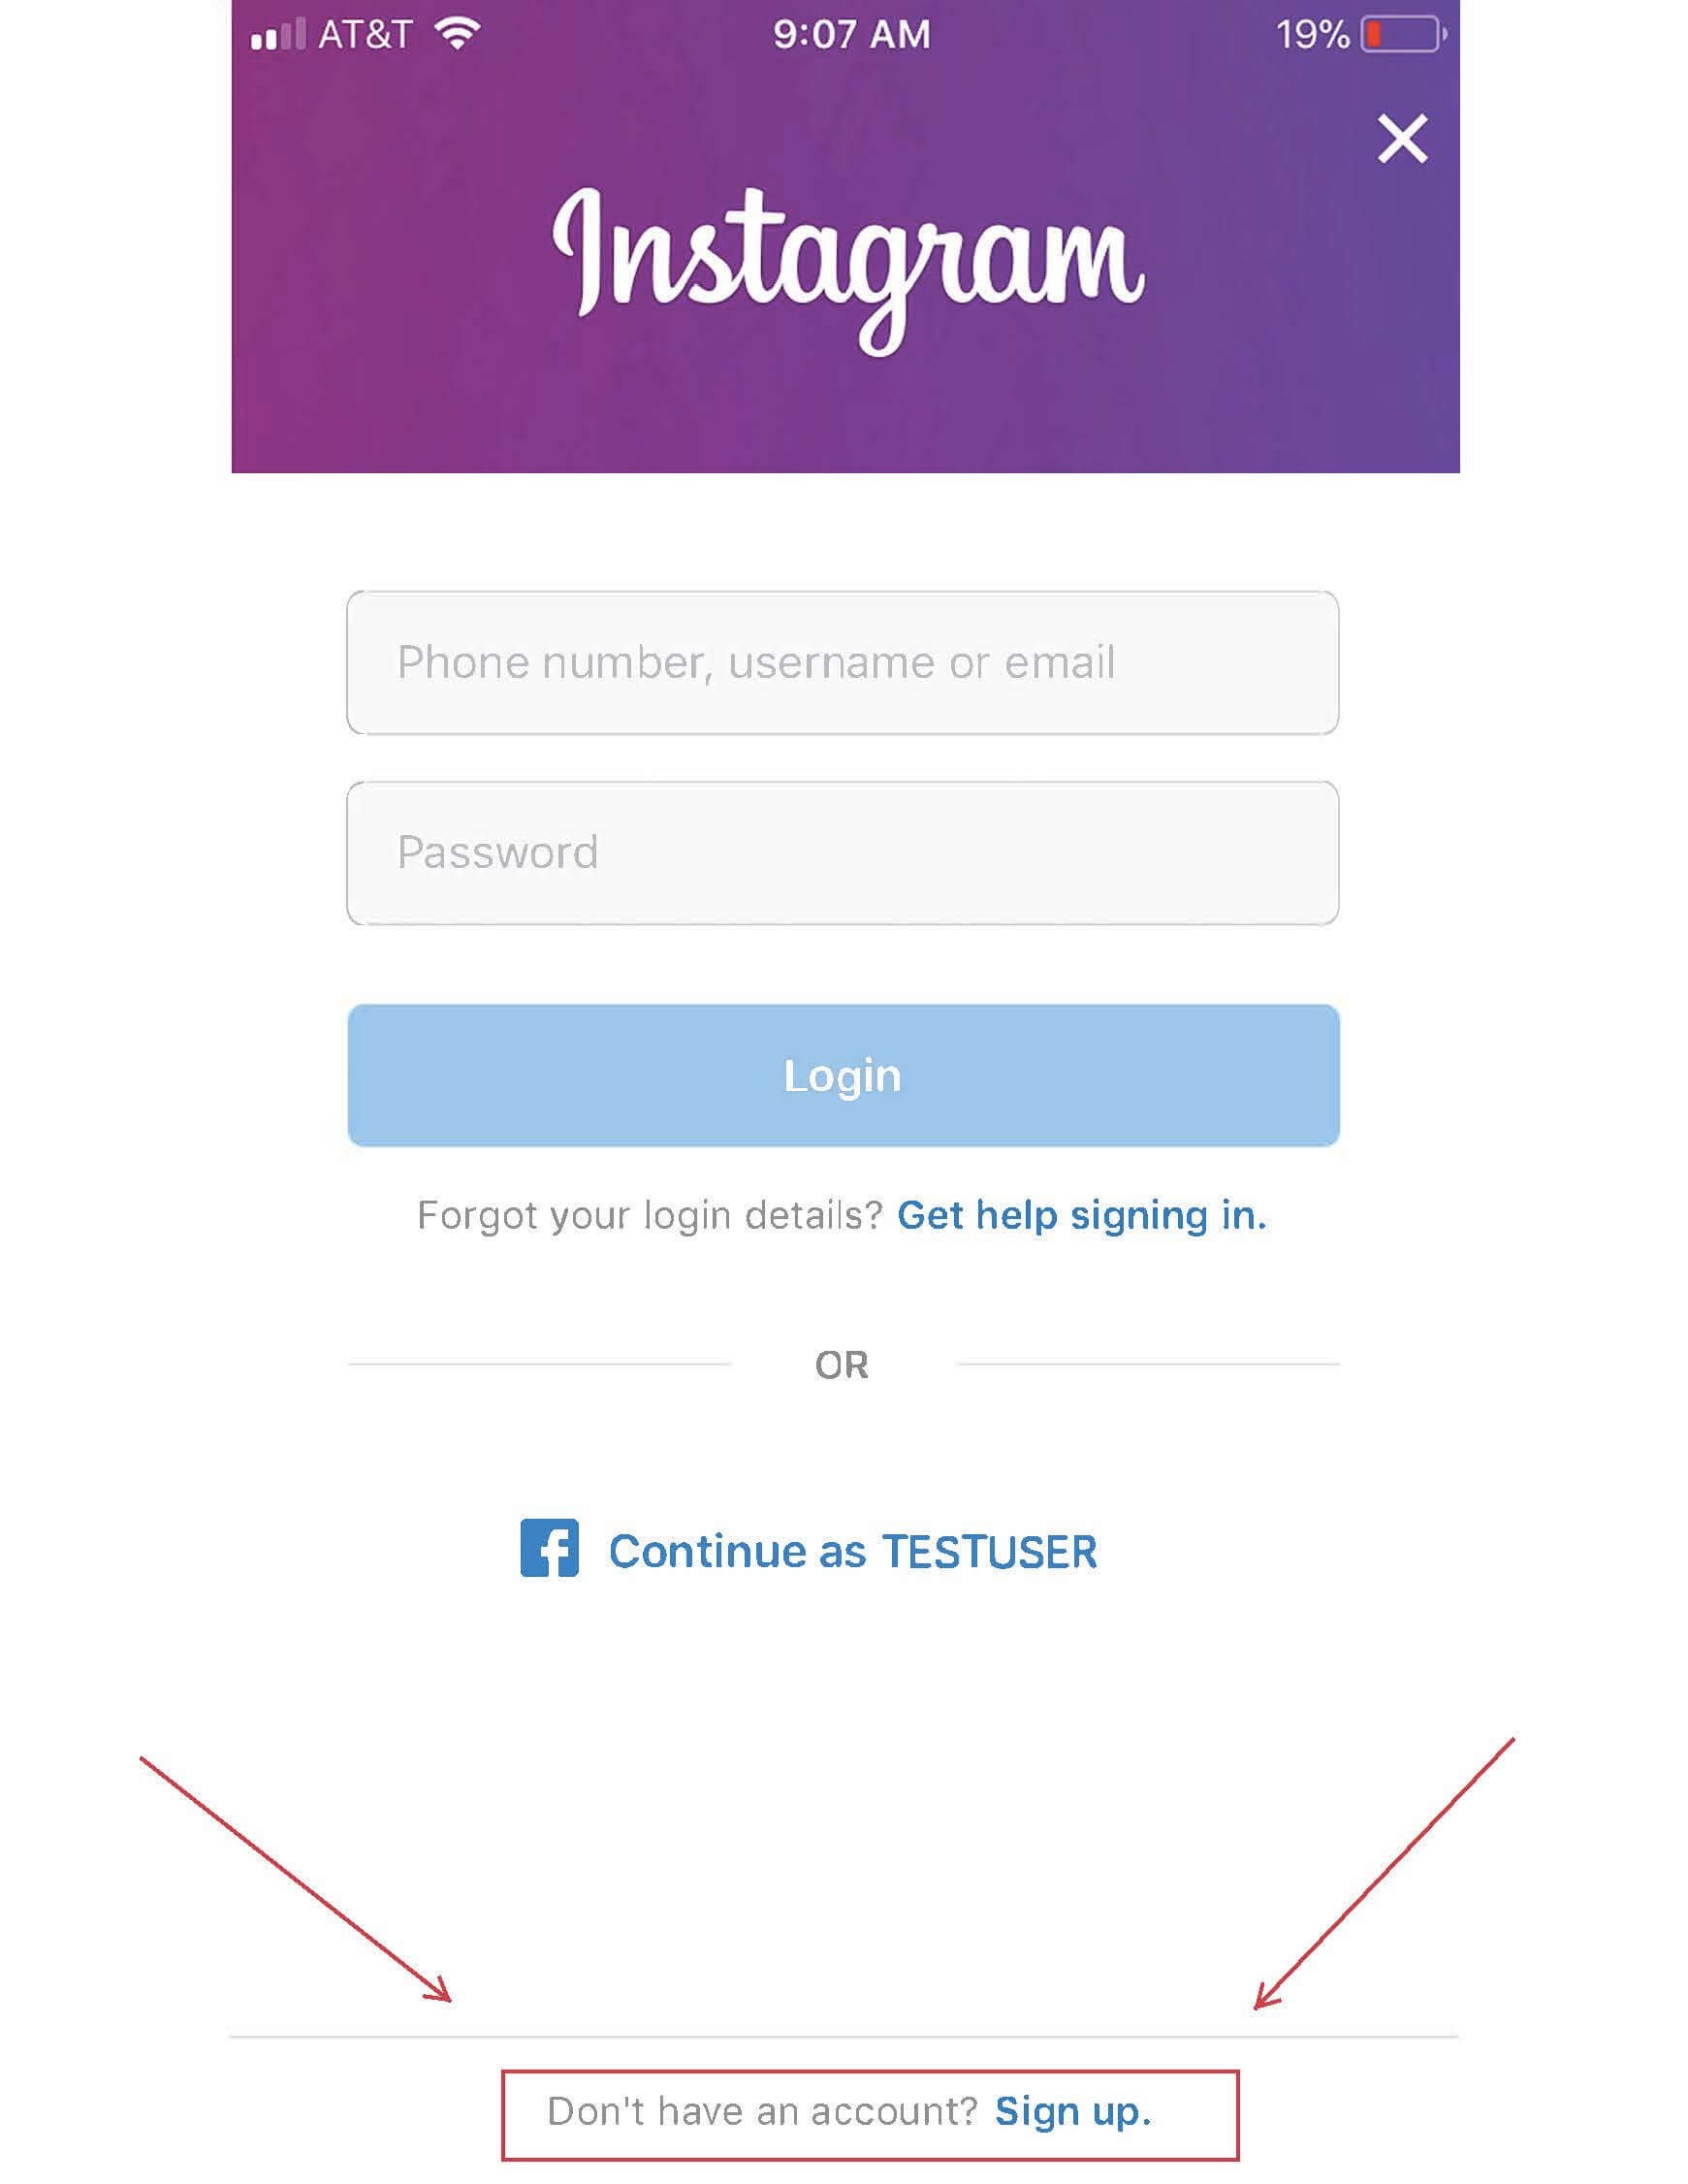 How To Change Instagram Username Before 14 days